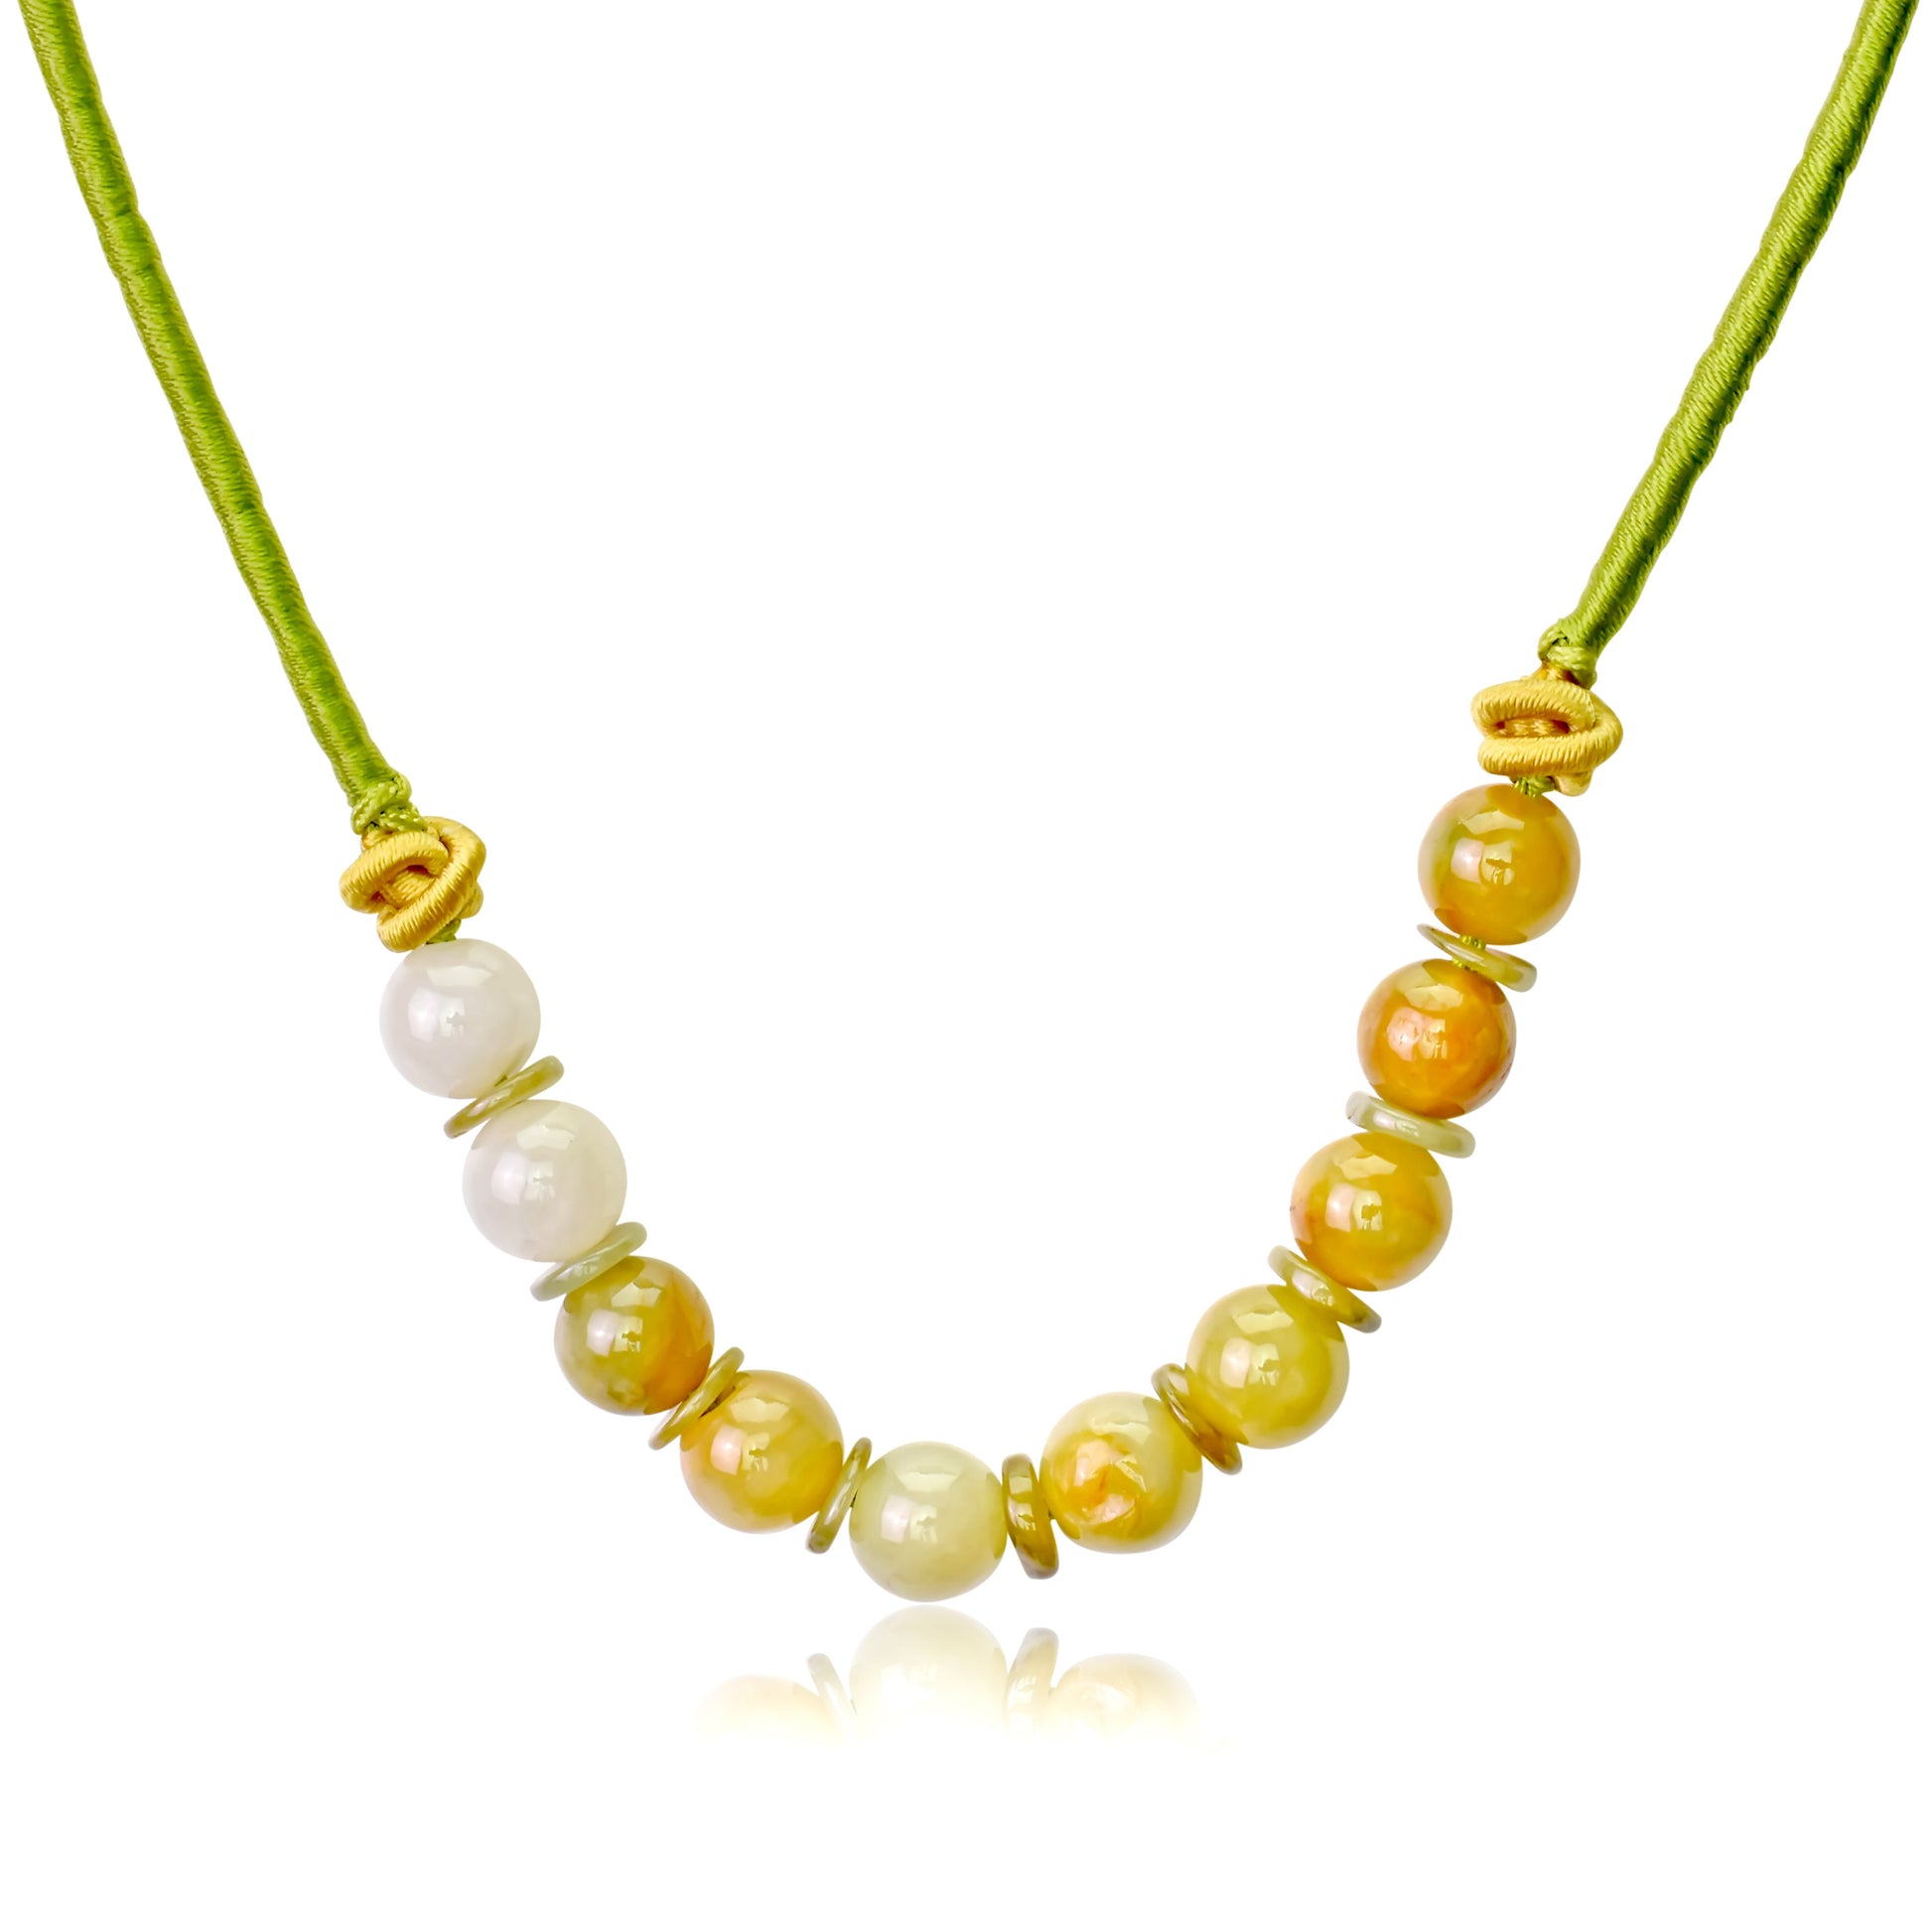 Get Closer to Nature with the PI Symbol and Jade Beads Necklace made with Lime Cord